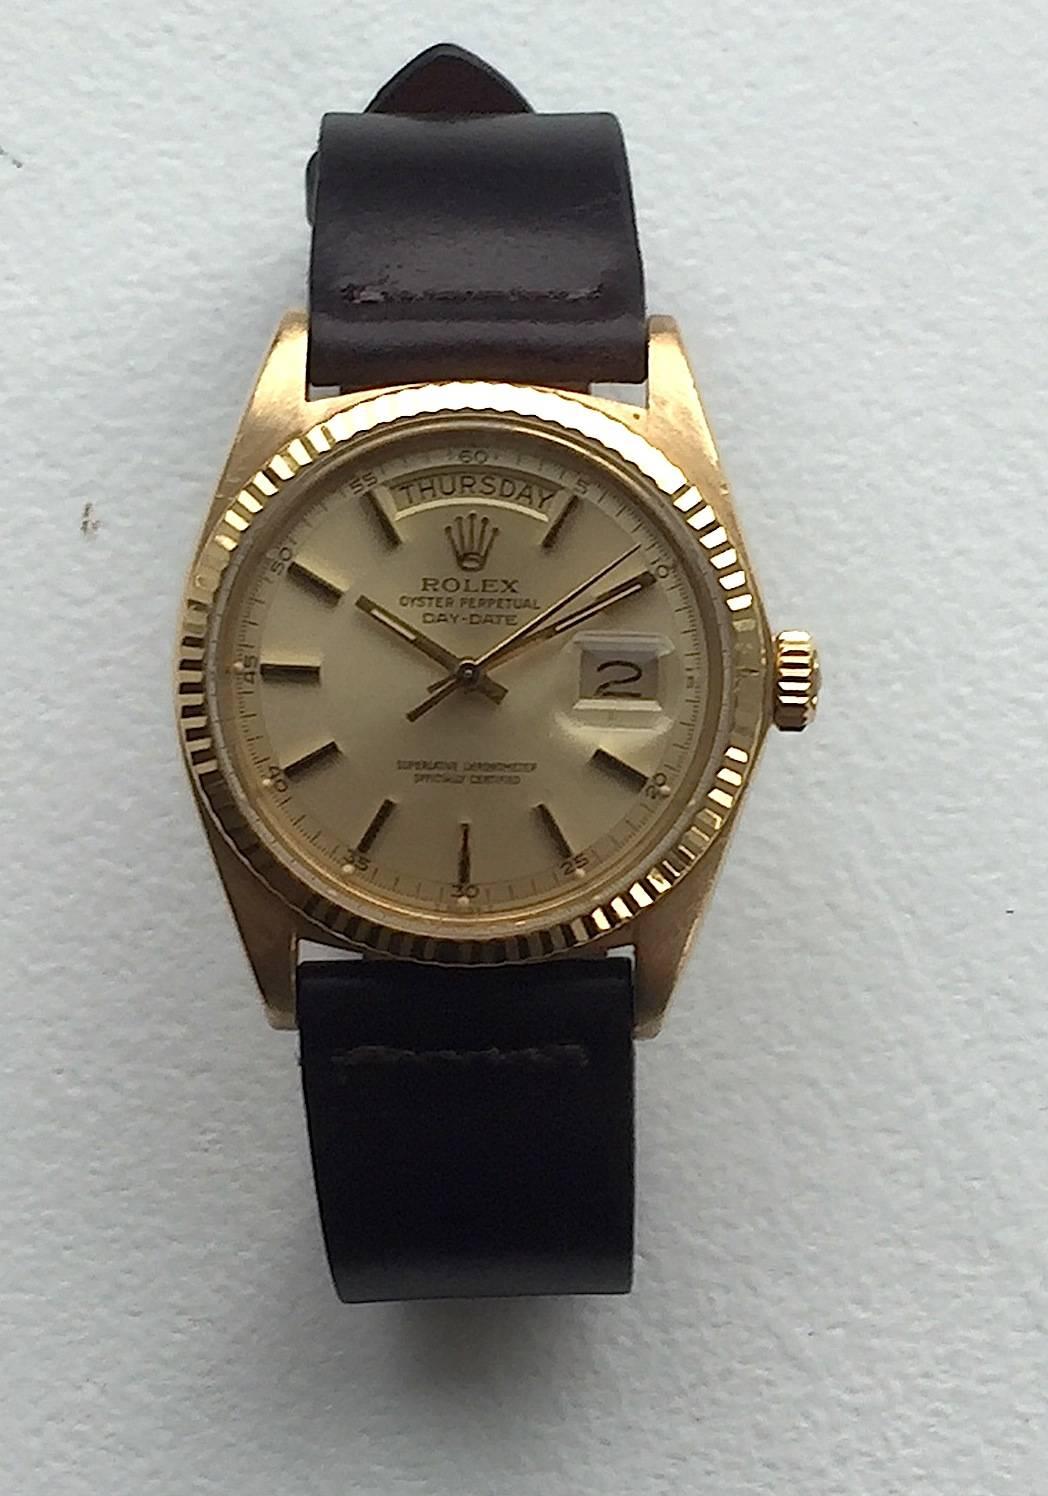 Rolex 18K Yellow Gold Day-Date Presidential Watch from the Early 1970's
Beautiful Factory Champagne Dial with Applied Yellow Hour Markers 
Yellow Gold Gold Fluted Bezel
18K Yellow Gold Case
36mm in size 
Features Rolex Automatic Movement with